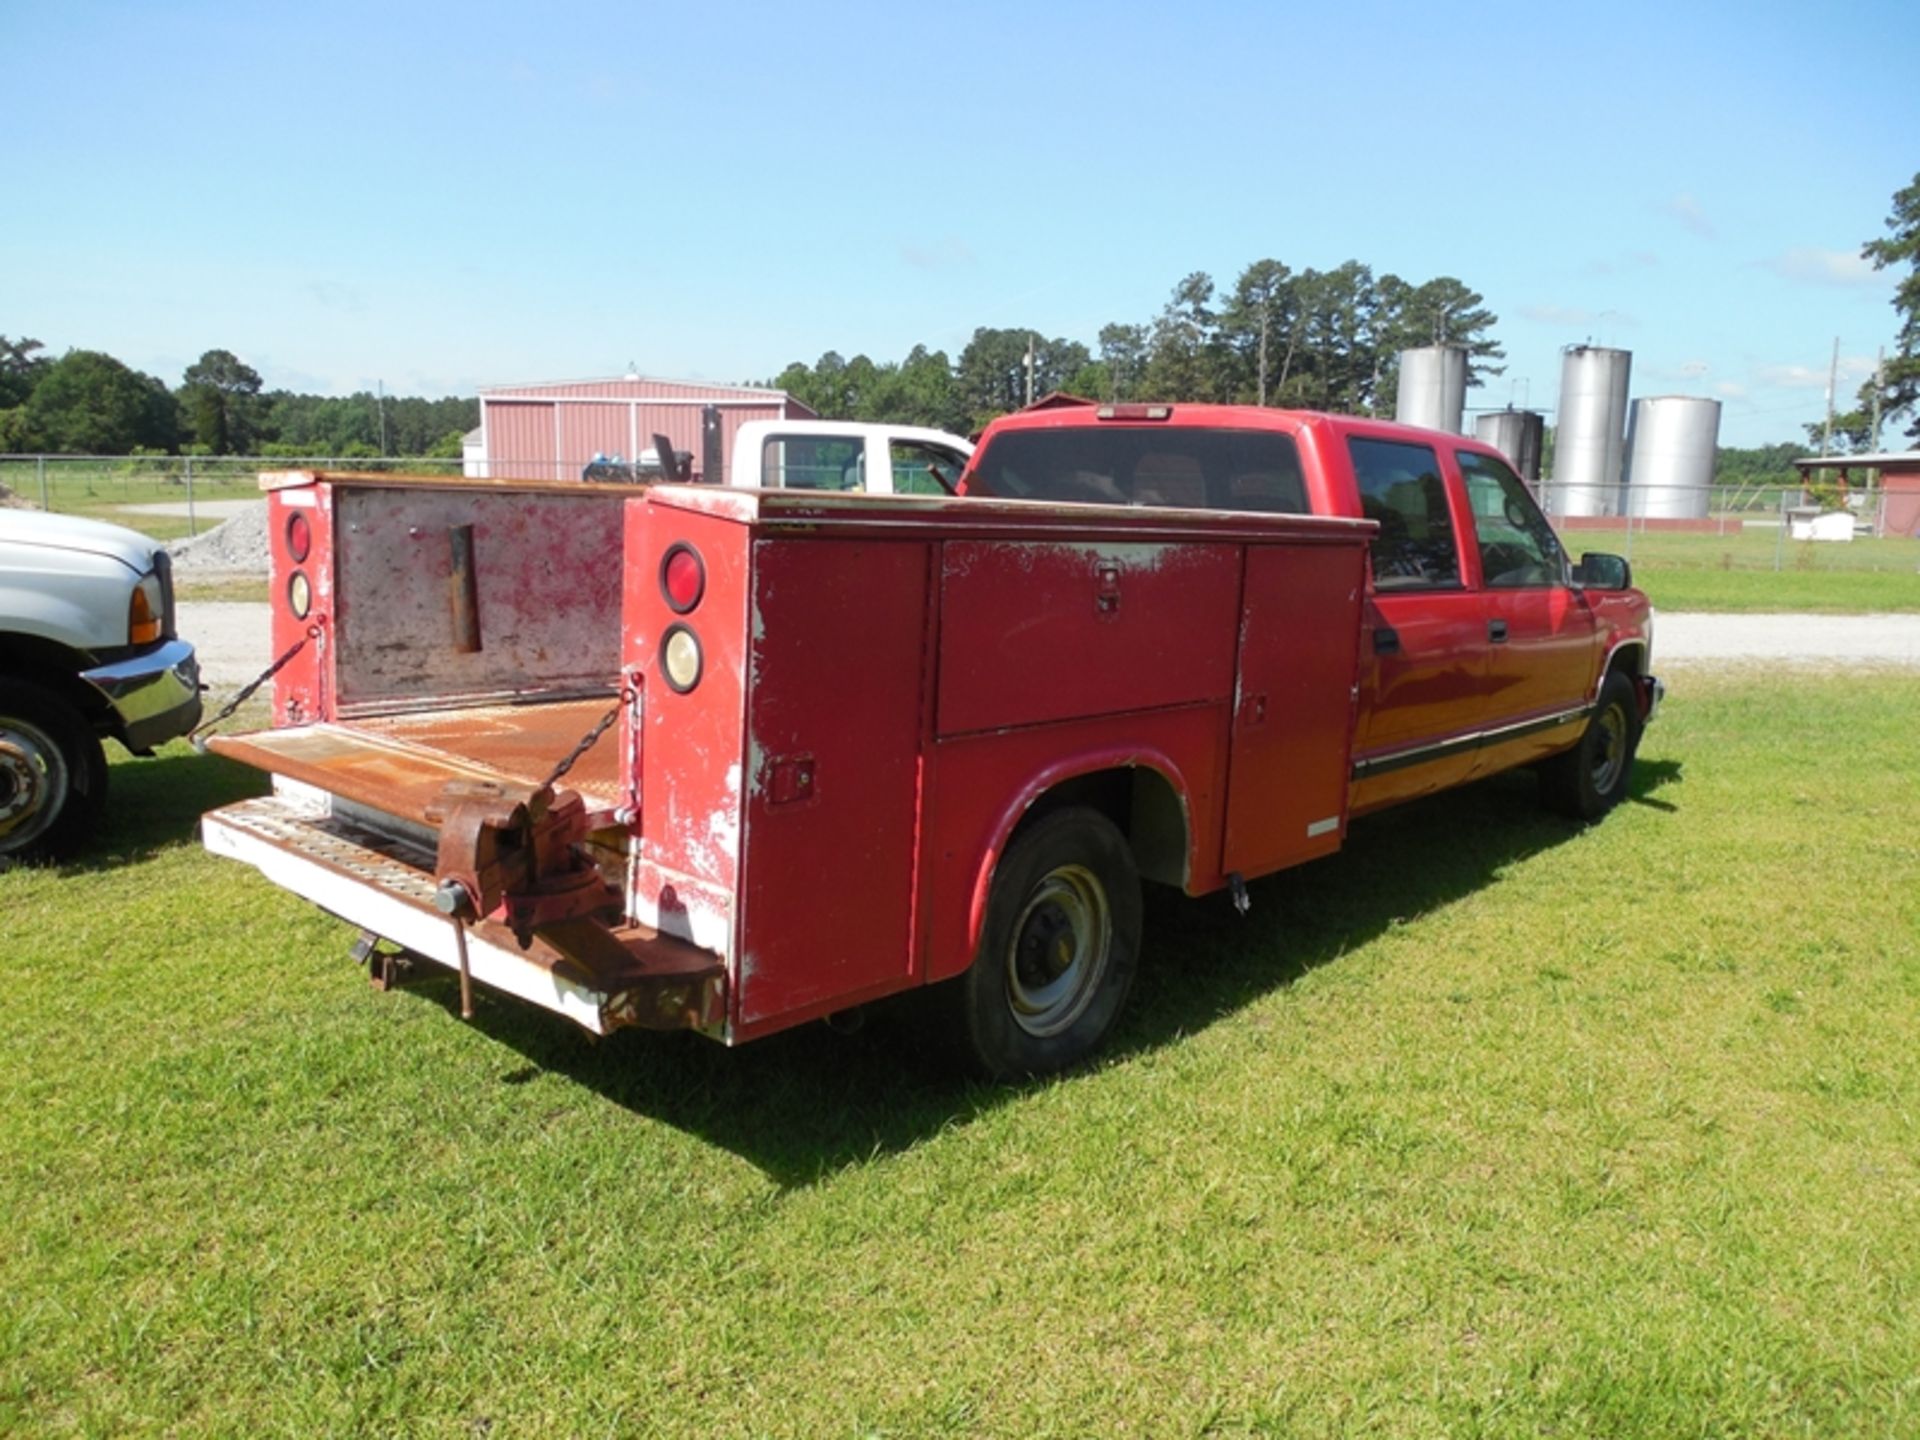 1997 Chev Crew Cab 3500 4 dr, Simpson 8' utility body, gas, manual, not running229,700 miles vin# - Image 3 of 8